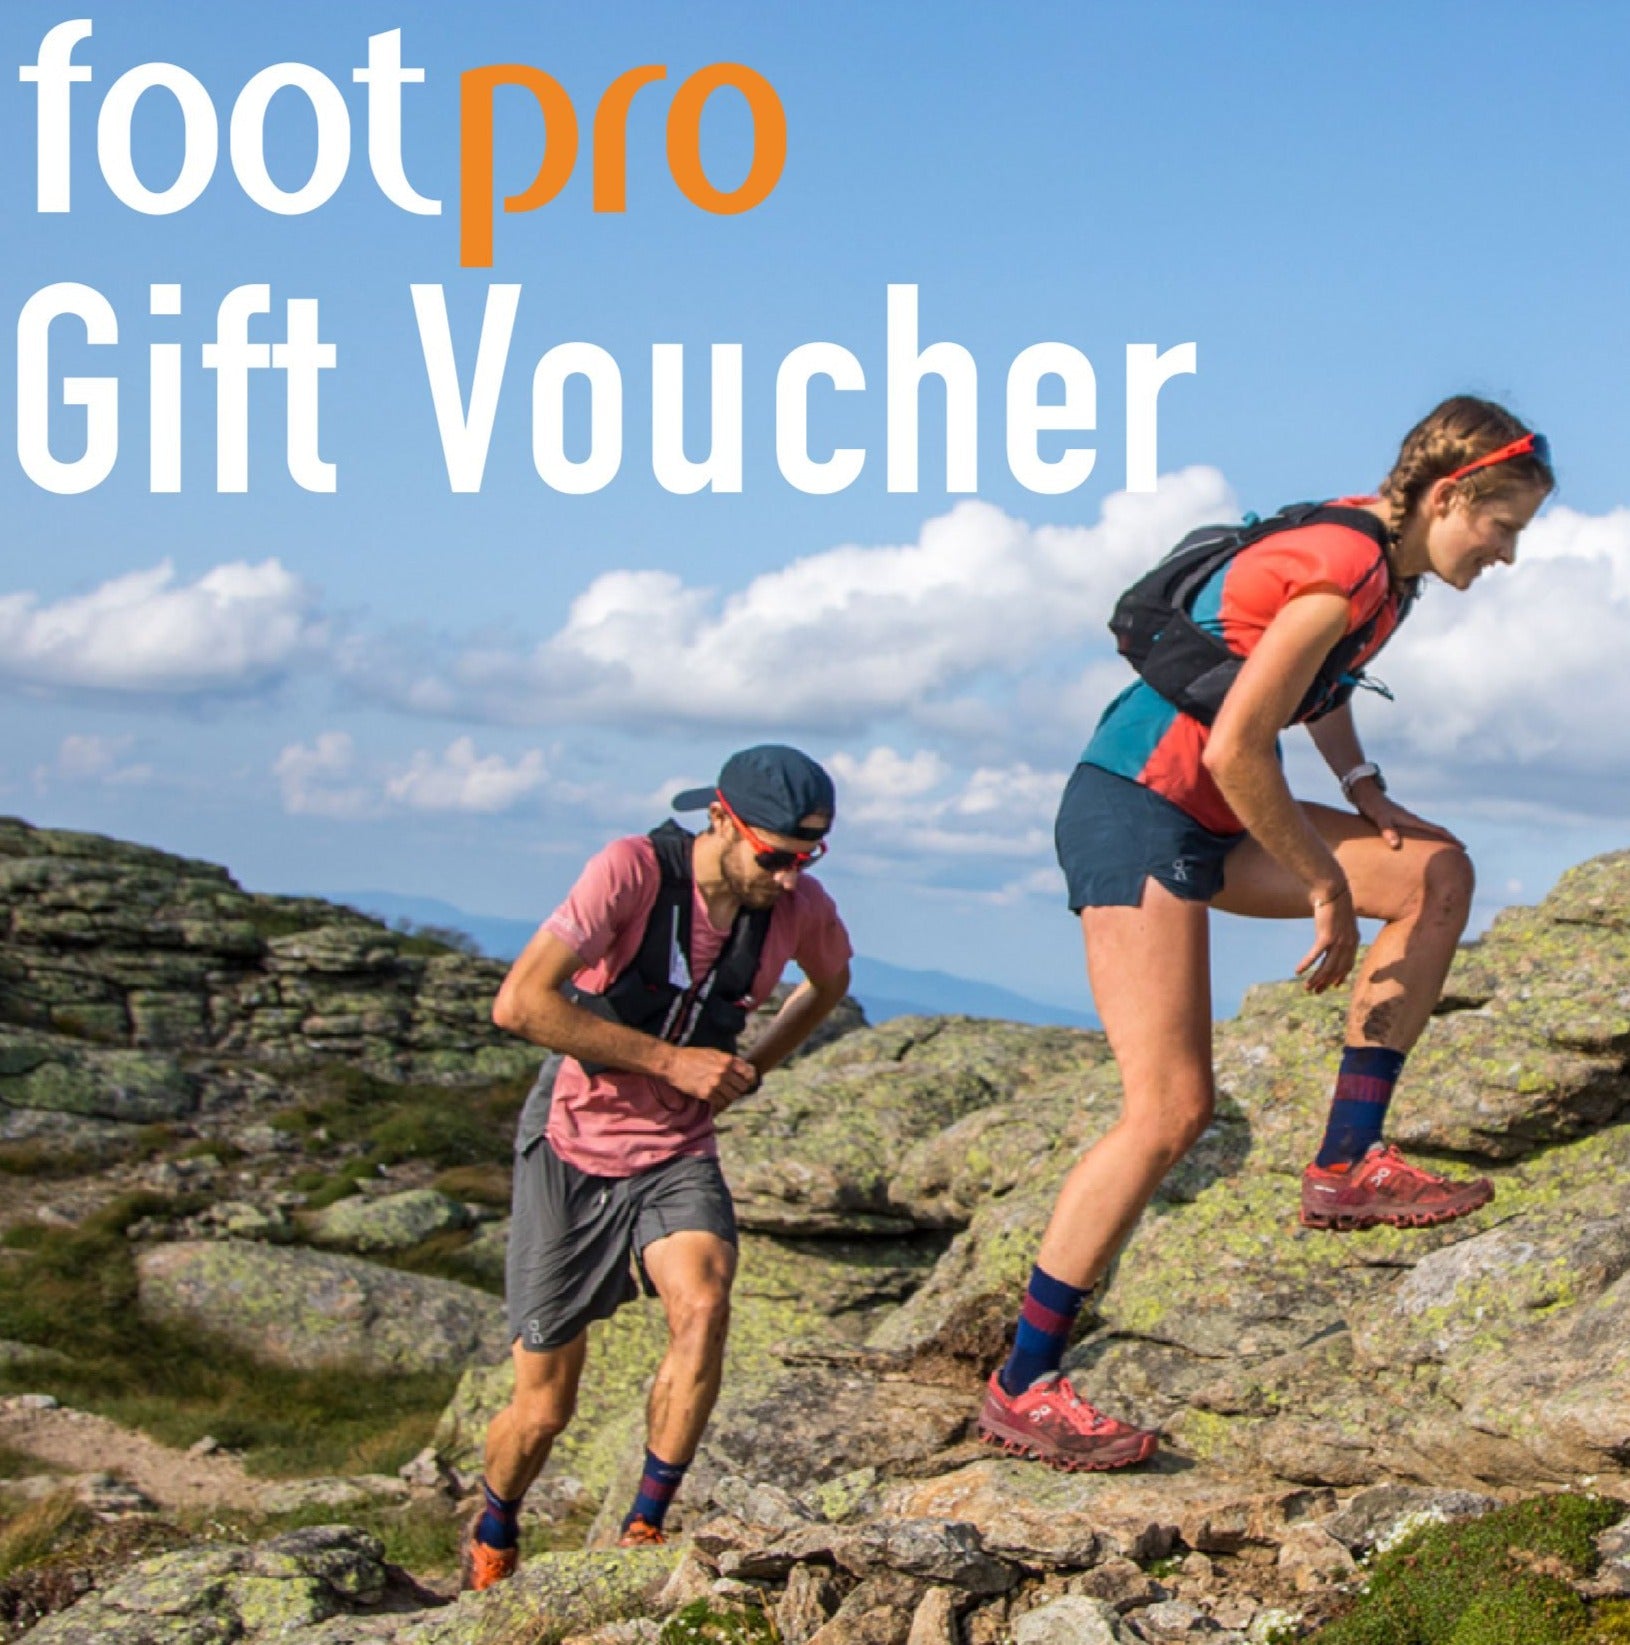 Gift cards and Gift vouchers are great gift ideas for runners and skiers